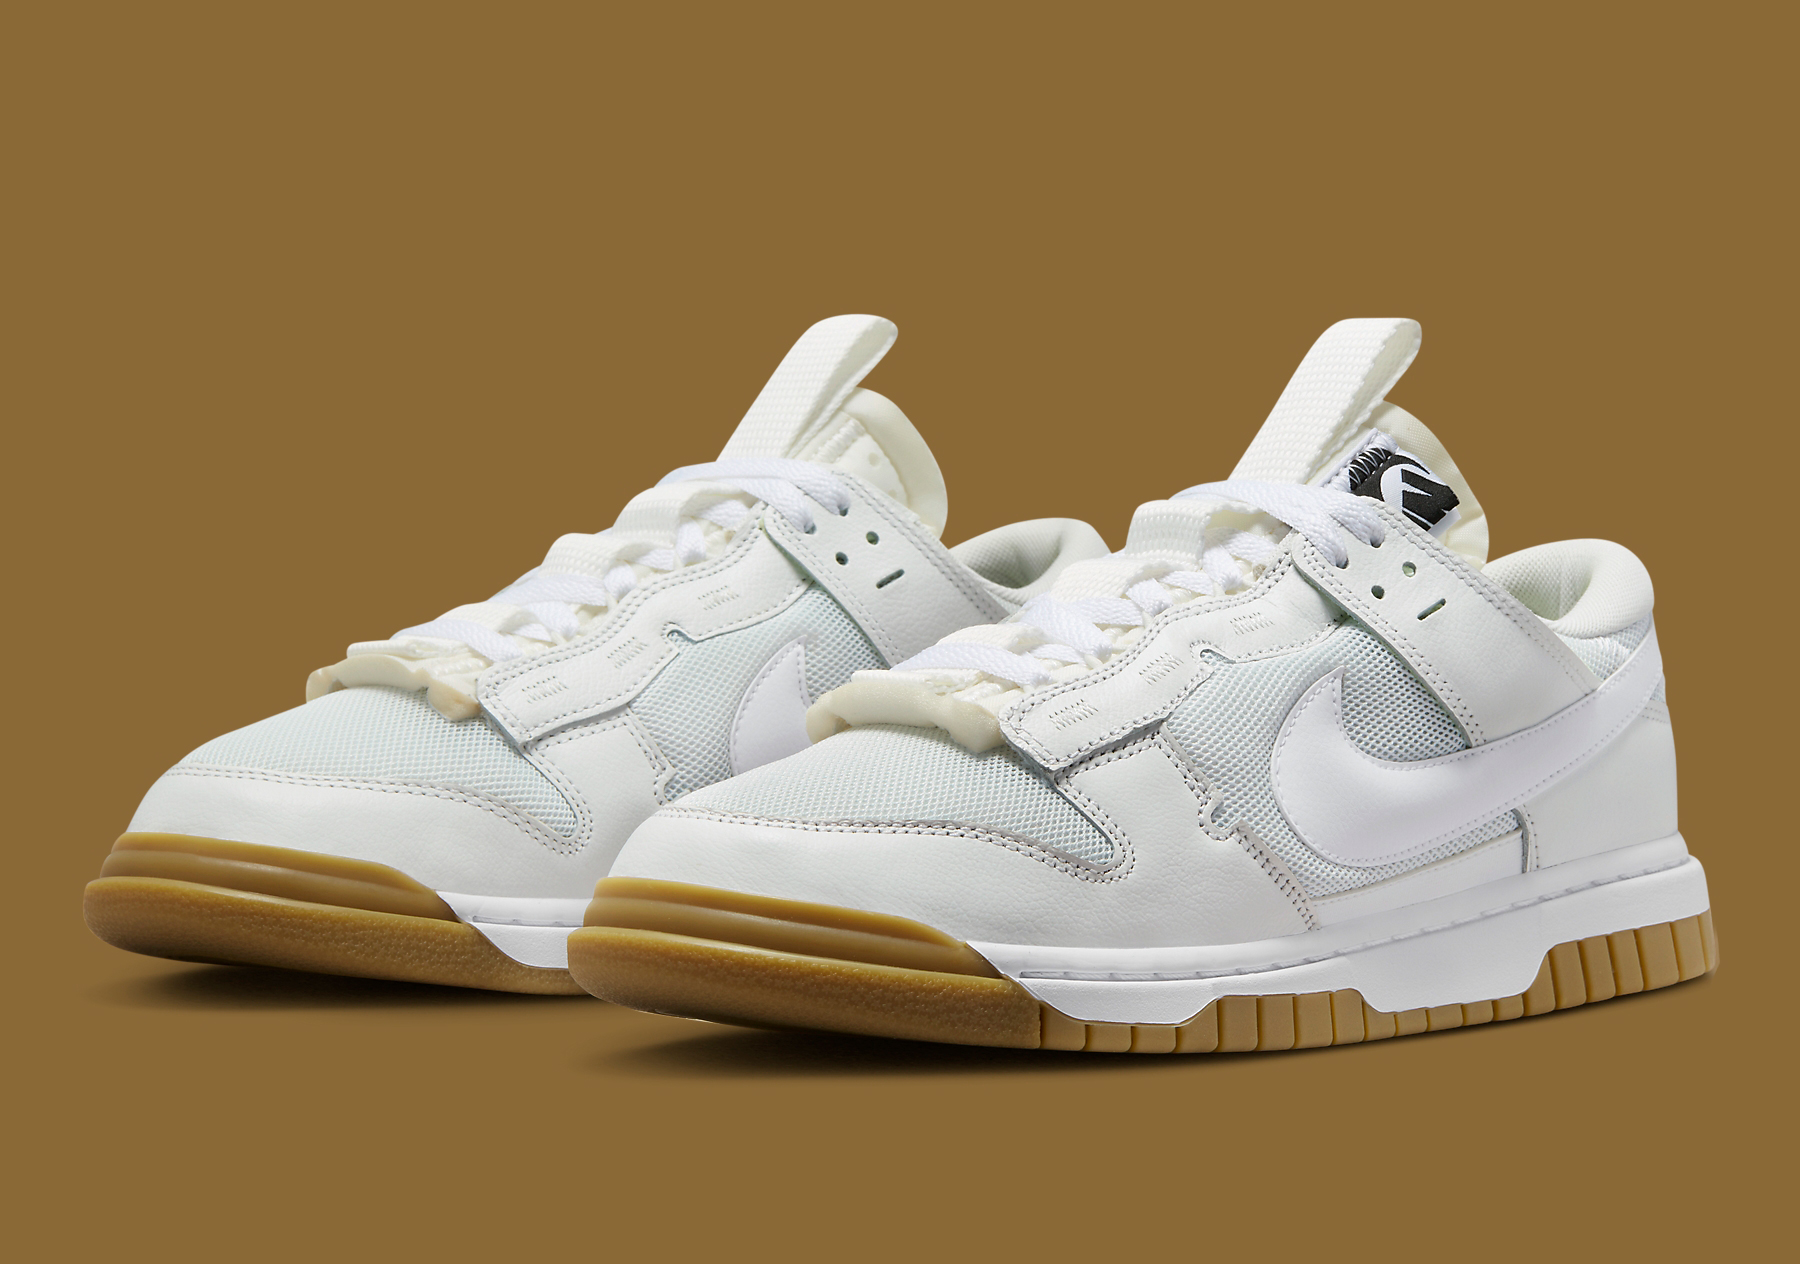 The Nike Dunk Low Remastered Appears In “White/Gum” Colorway ...